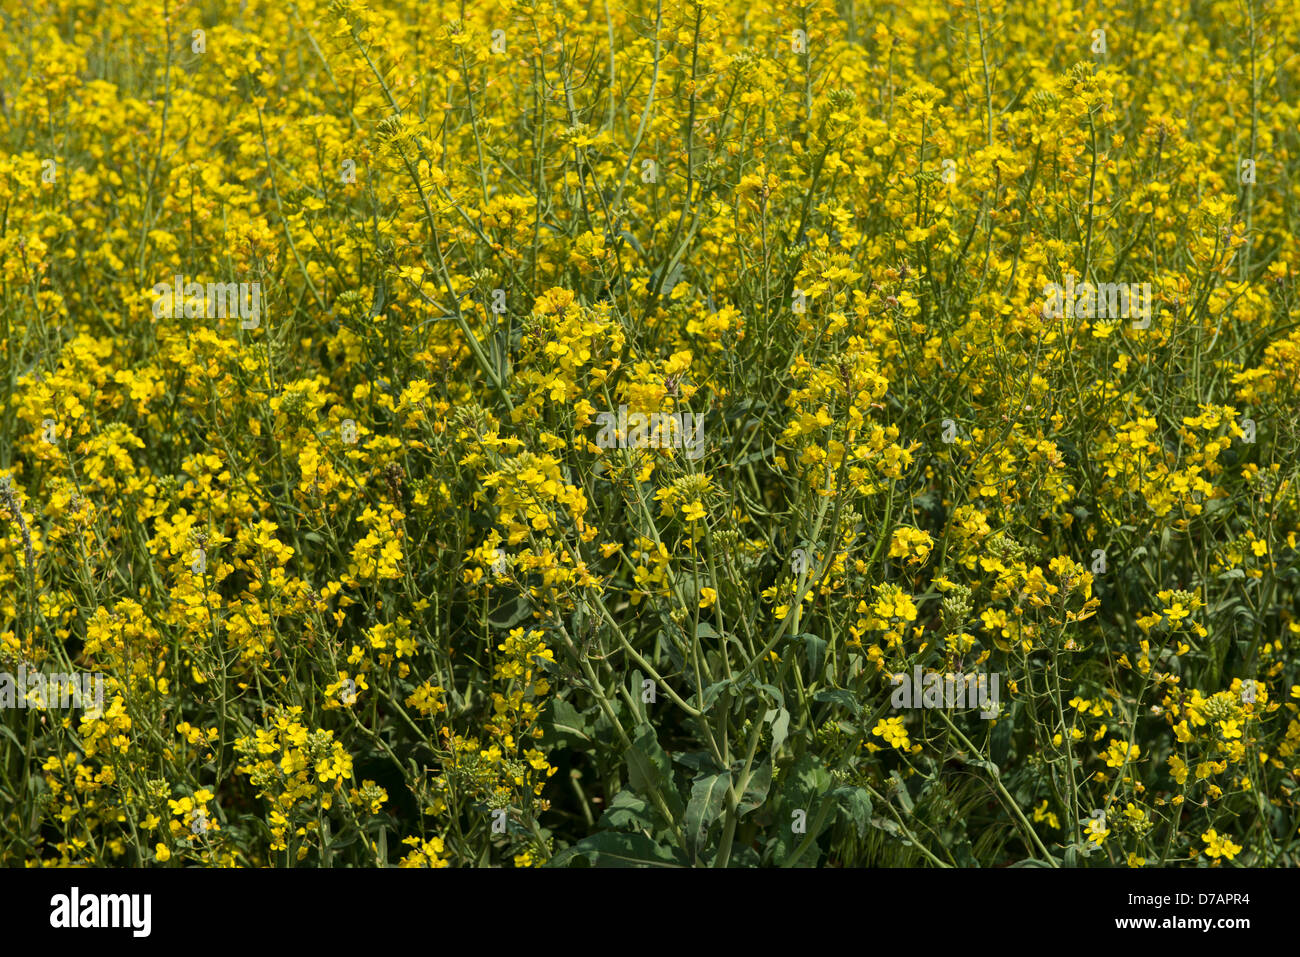 A field of Canola plants, Brassica napus, in bloom in Oklahoma, USA. Closeup. Stock Photo